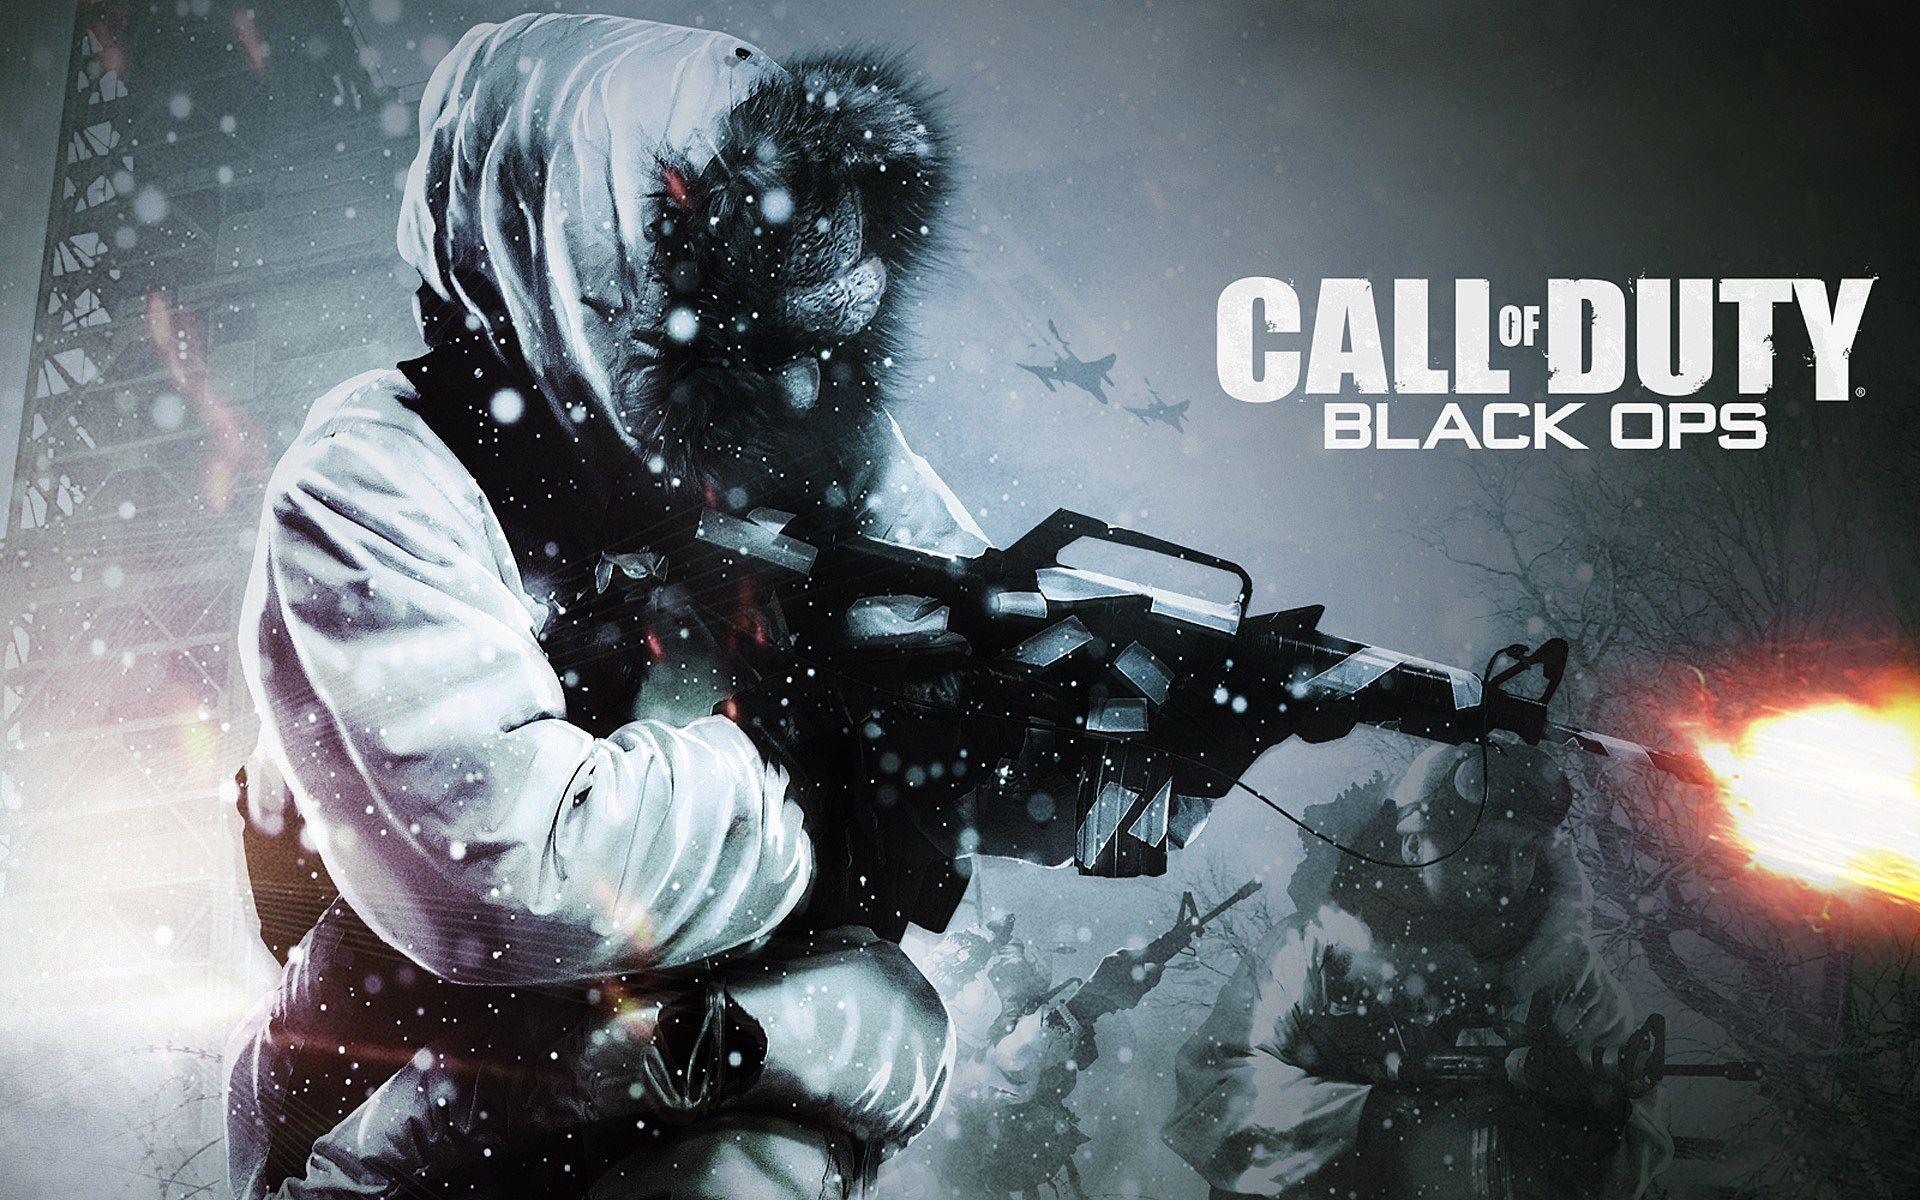 call of duty black ops 1 zombies